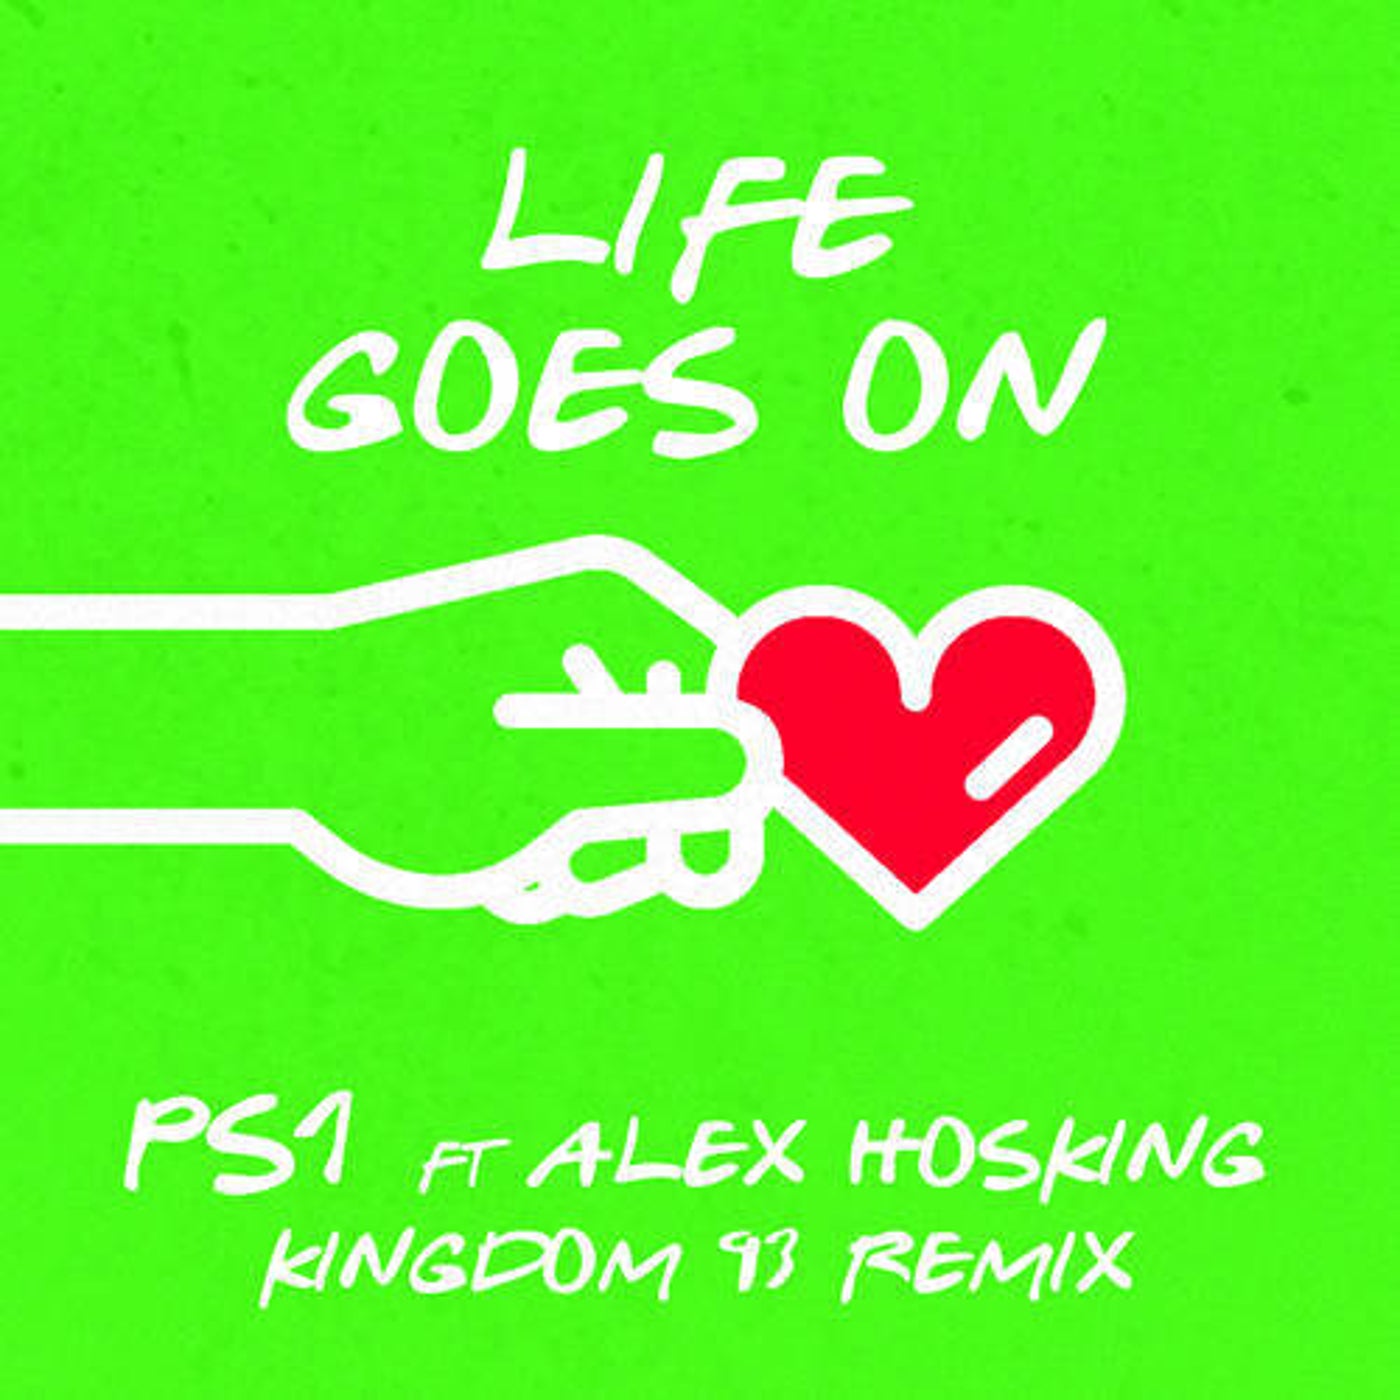 PS1 Feat Alex Hosking - Life Goes On Kingdom 93 Extended Remix-SINGLE-WEB-2021-iDC